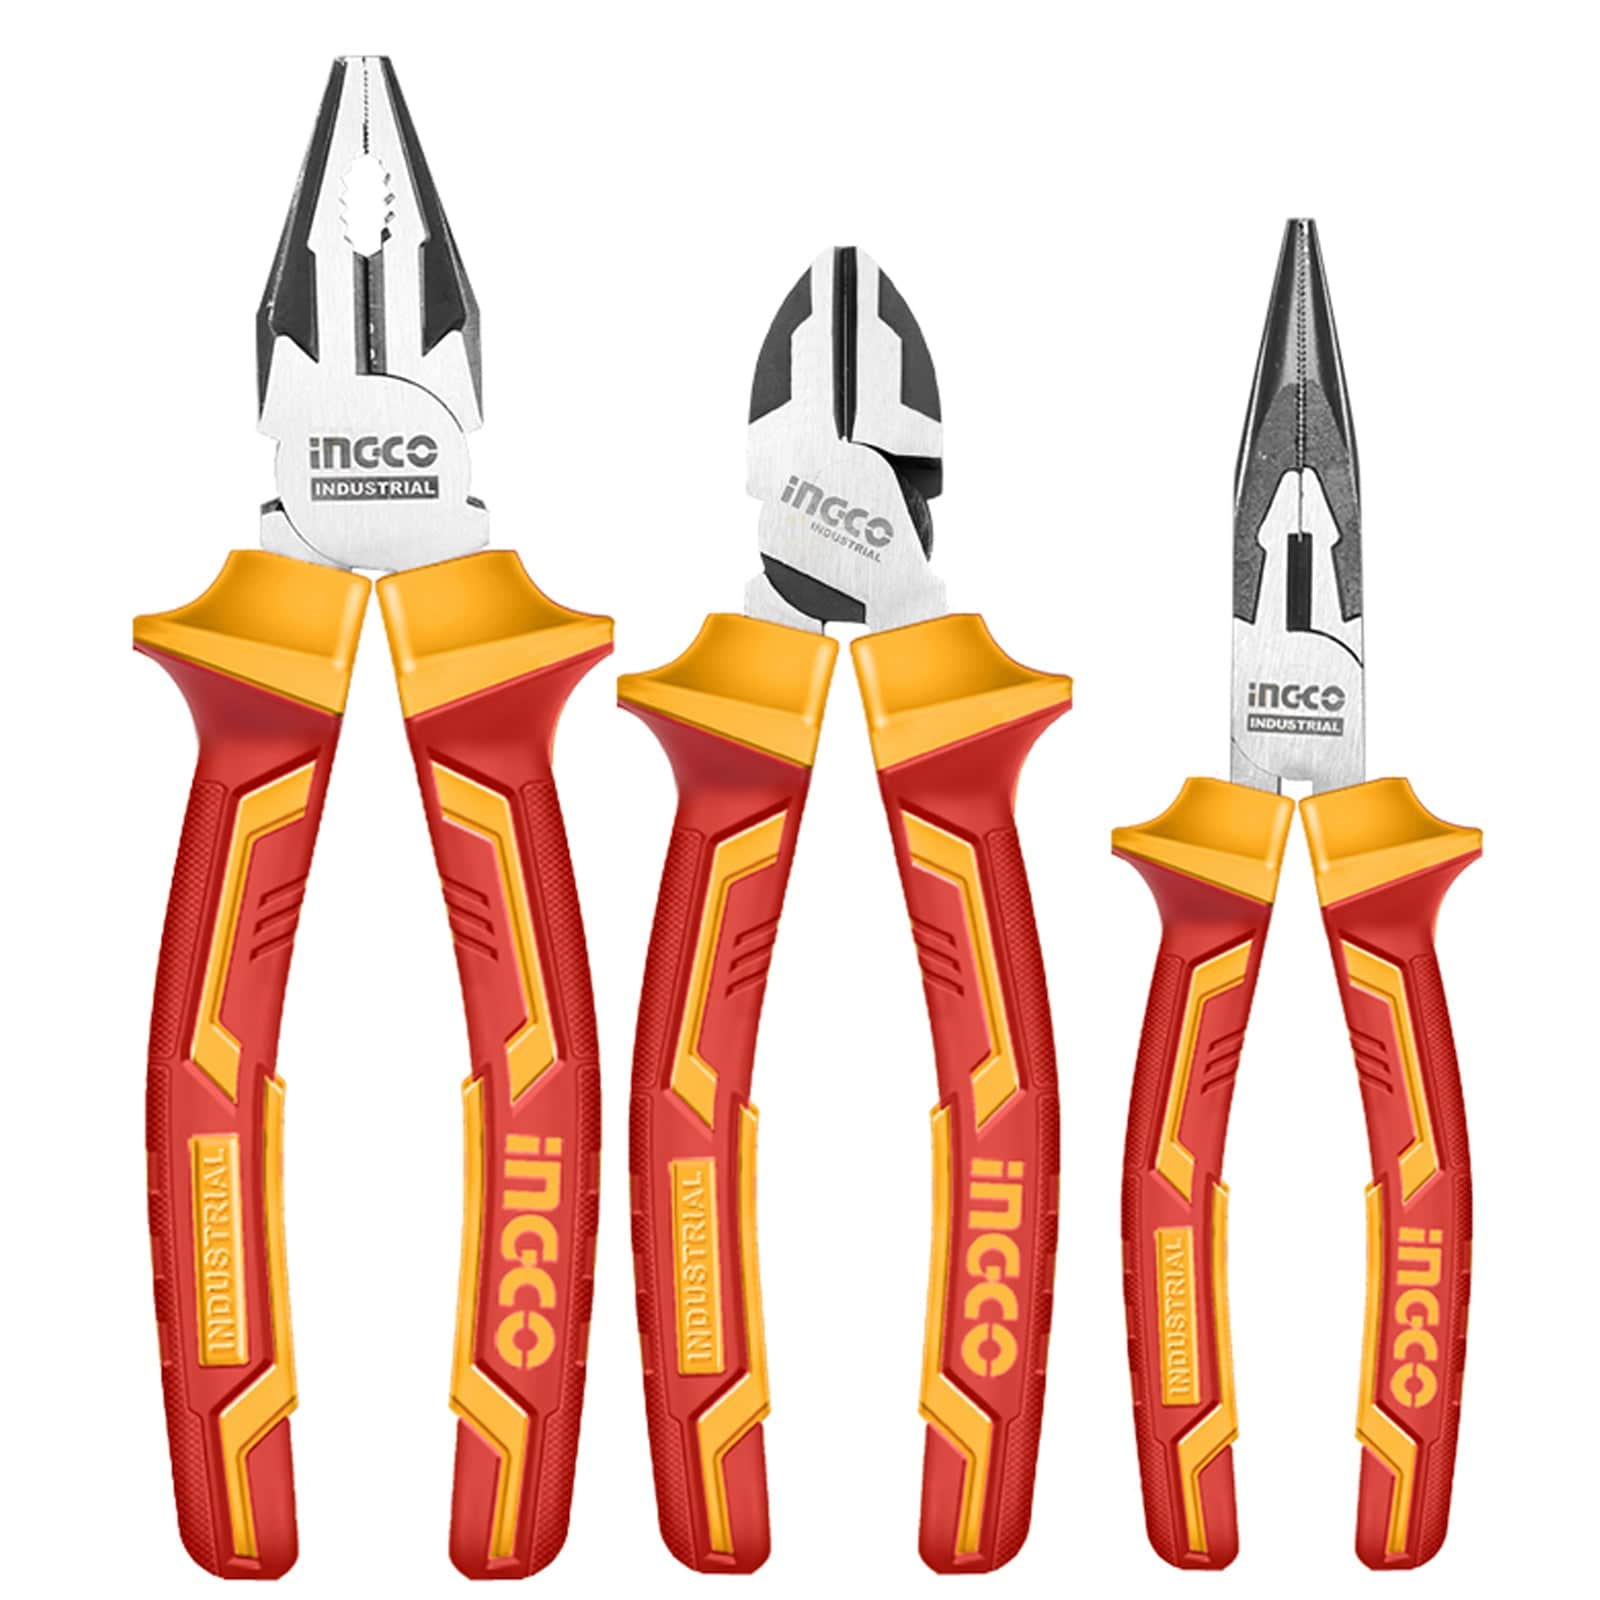 Ingco 3 Pieces Insulated Plier Set - HIKPS28318 | Supply Master | Accra, Ghana Pliers Buy Tools hardware Building materials